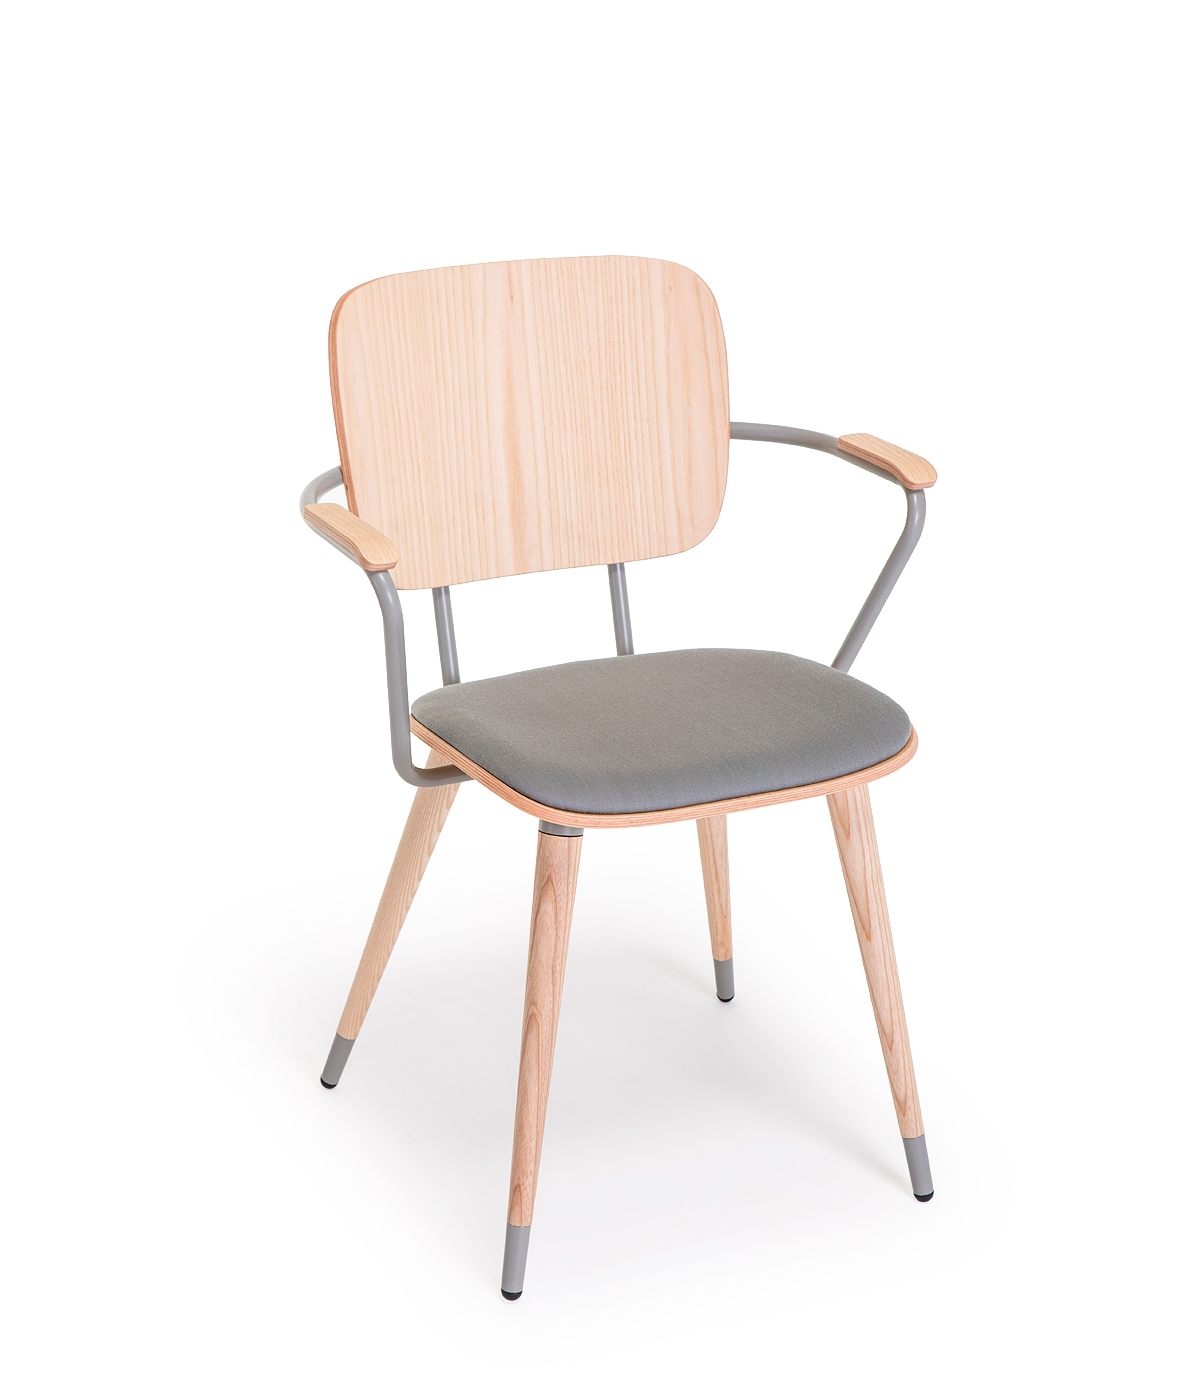 Vergés - ABC chair with wooden armrests and legs